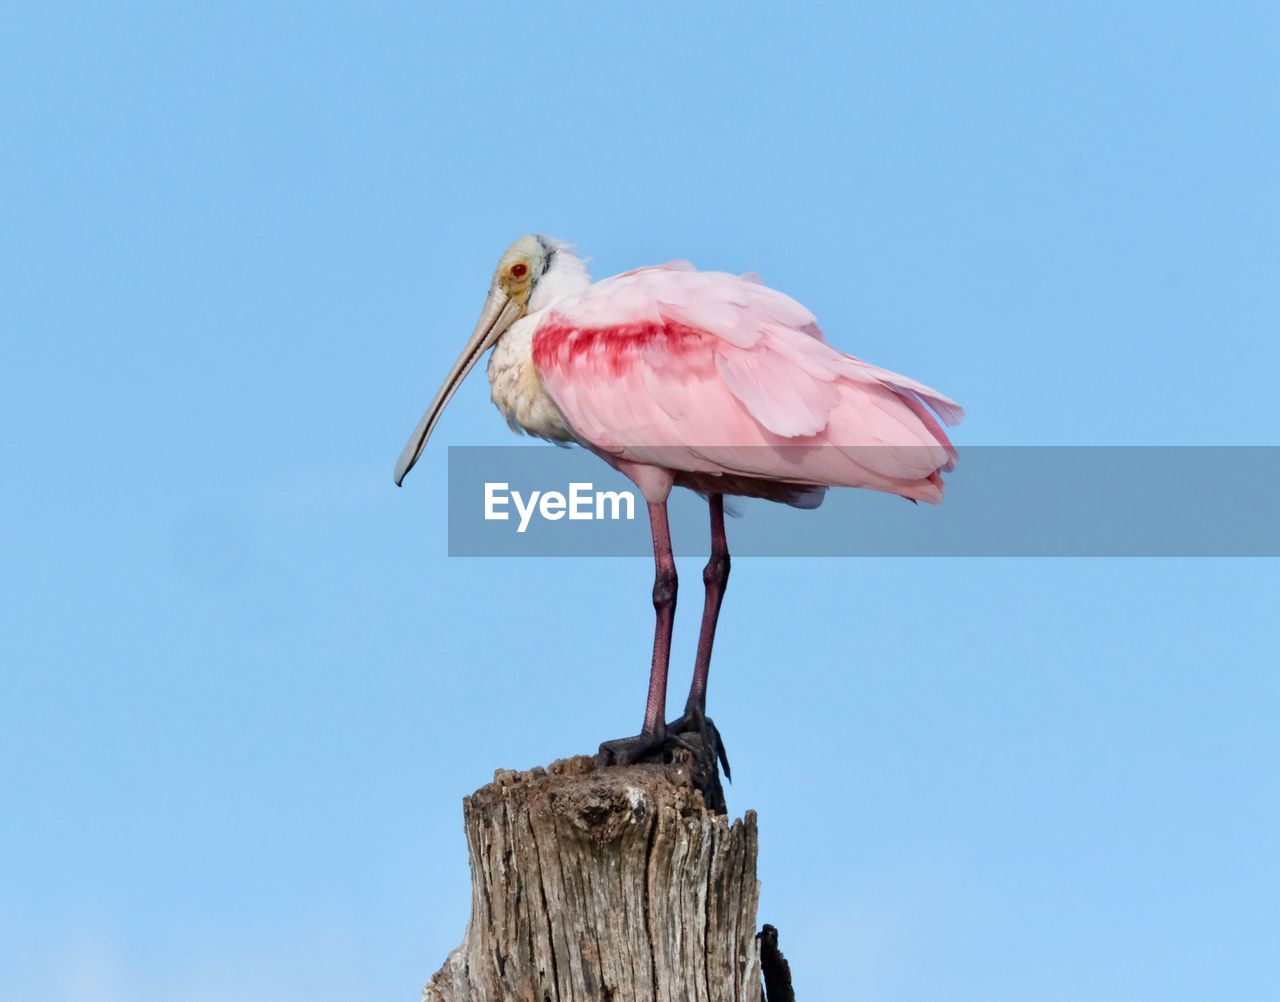 LOW ANGLE VIEW OF BIRD PERCHING ON WOODEN POST AGAINST BLUE SKY